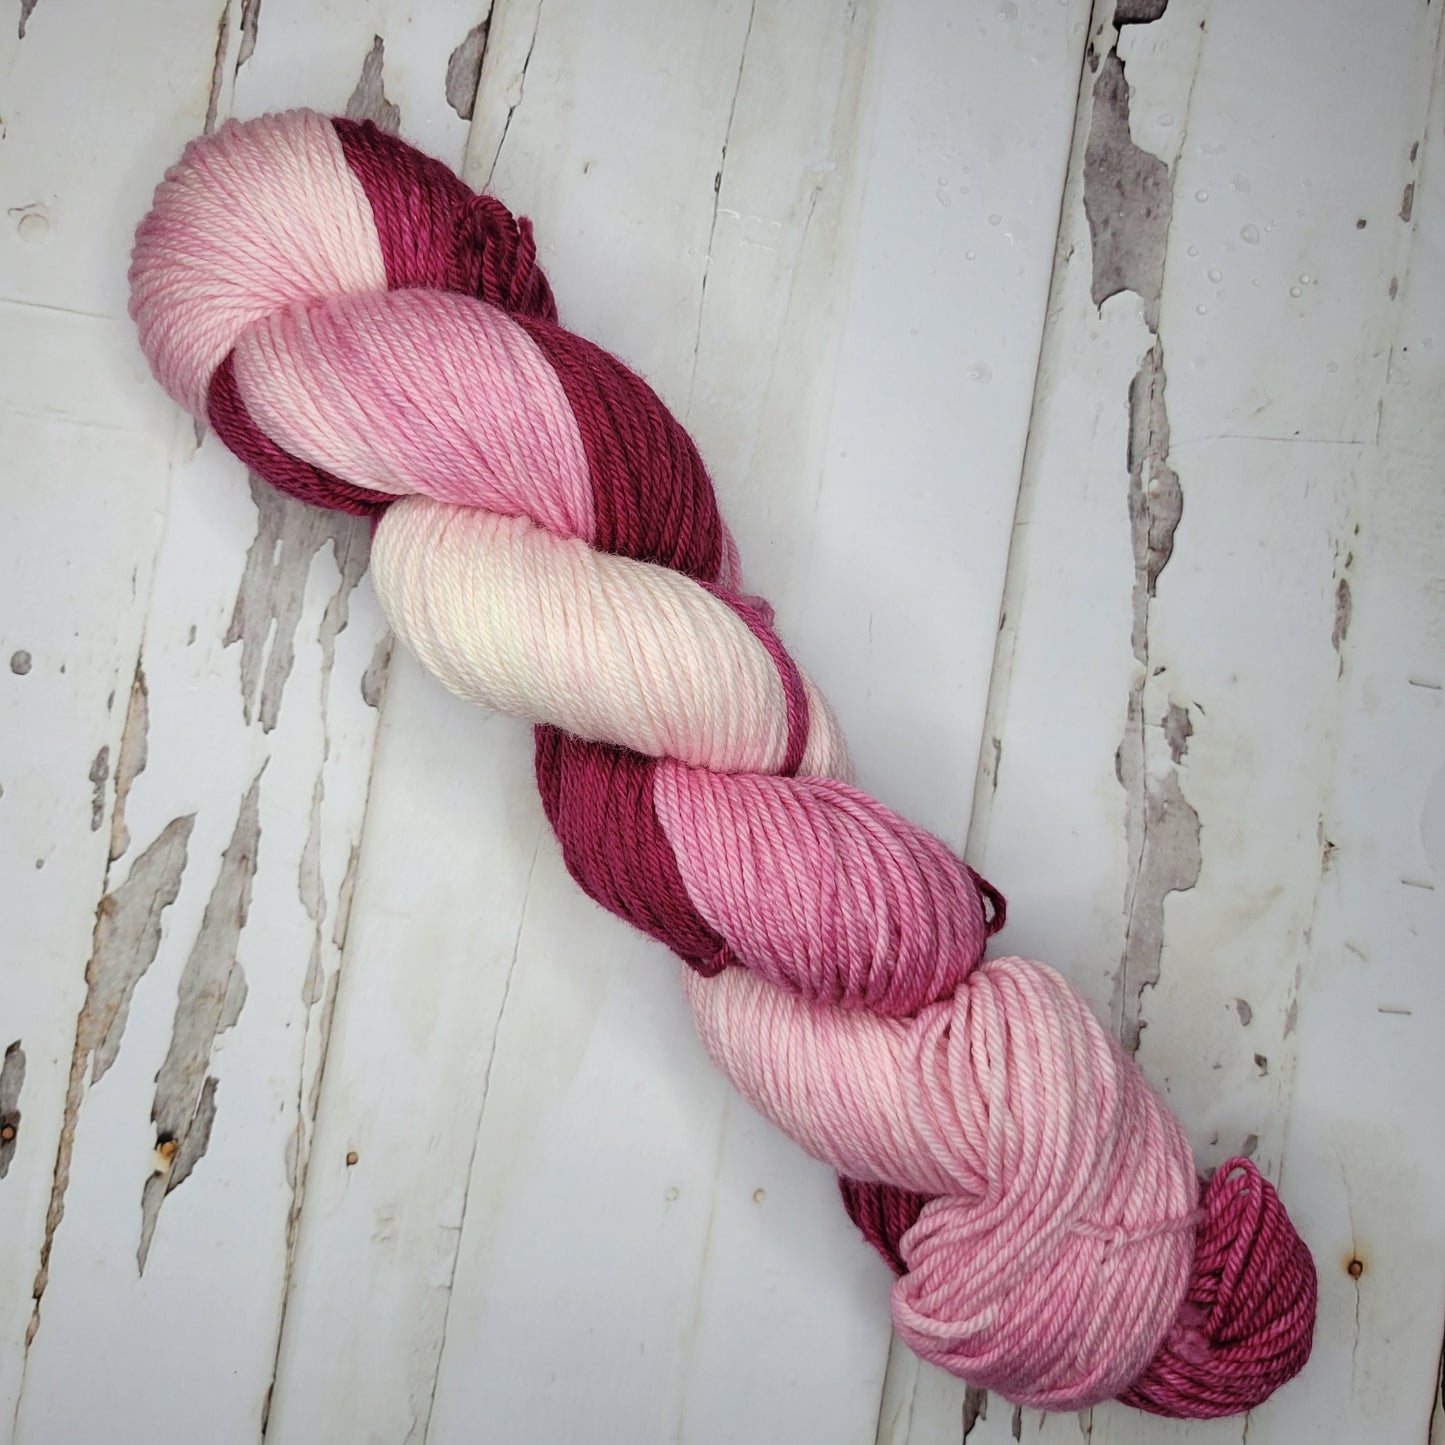 Hand Dyed Yarn in Cherry Blossom Set